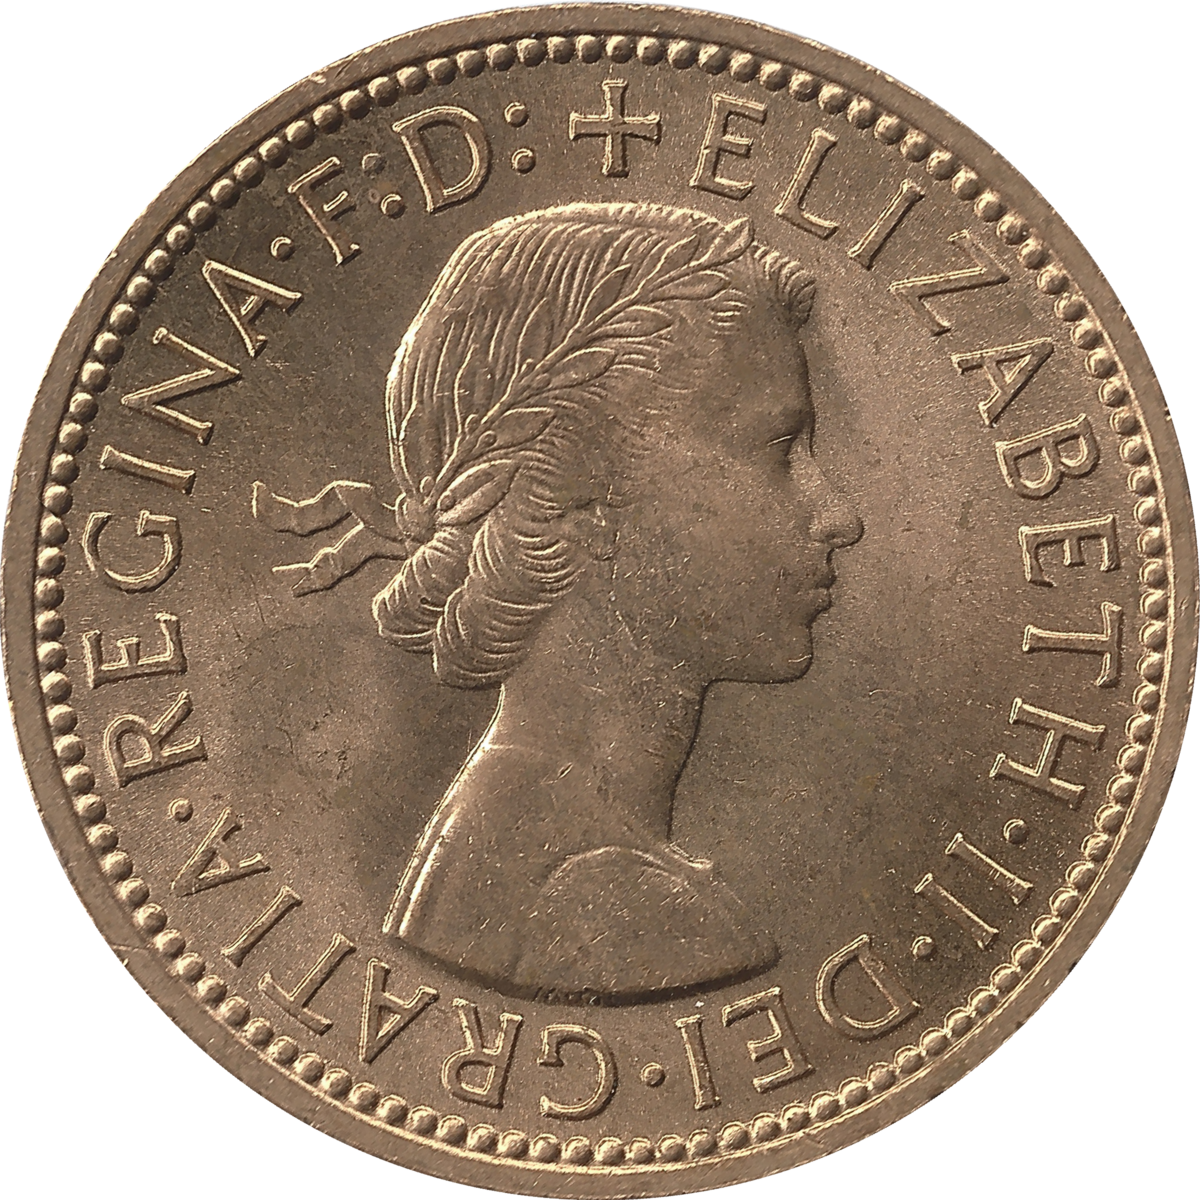 11 rare coins in the UK - check your change now - Skint Dad